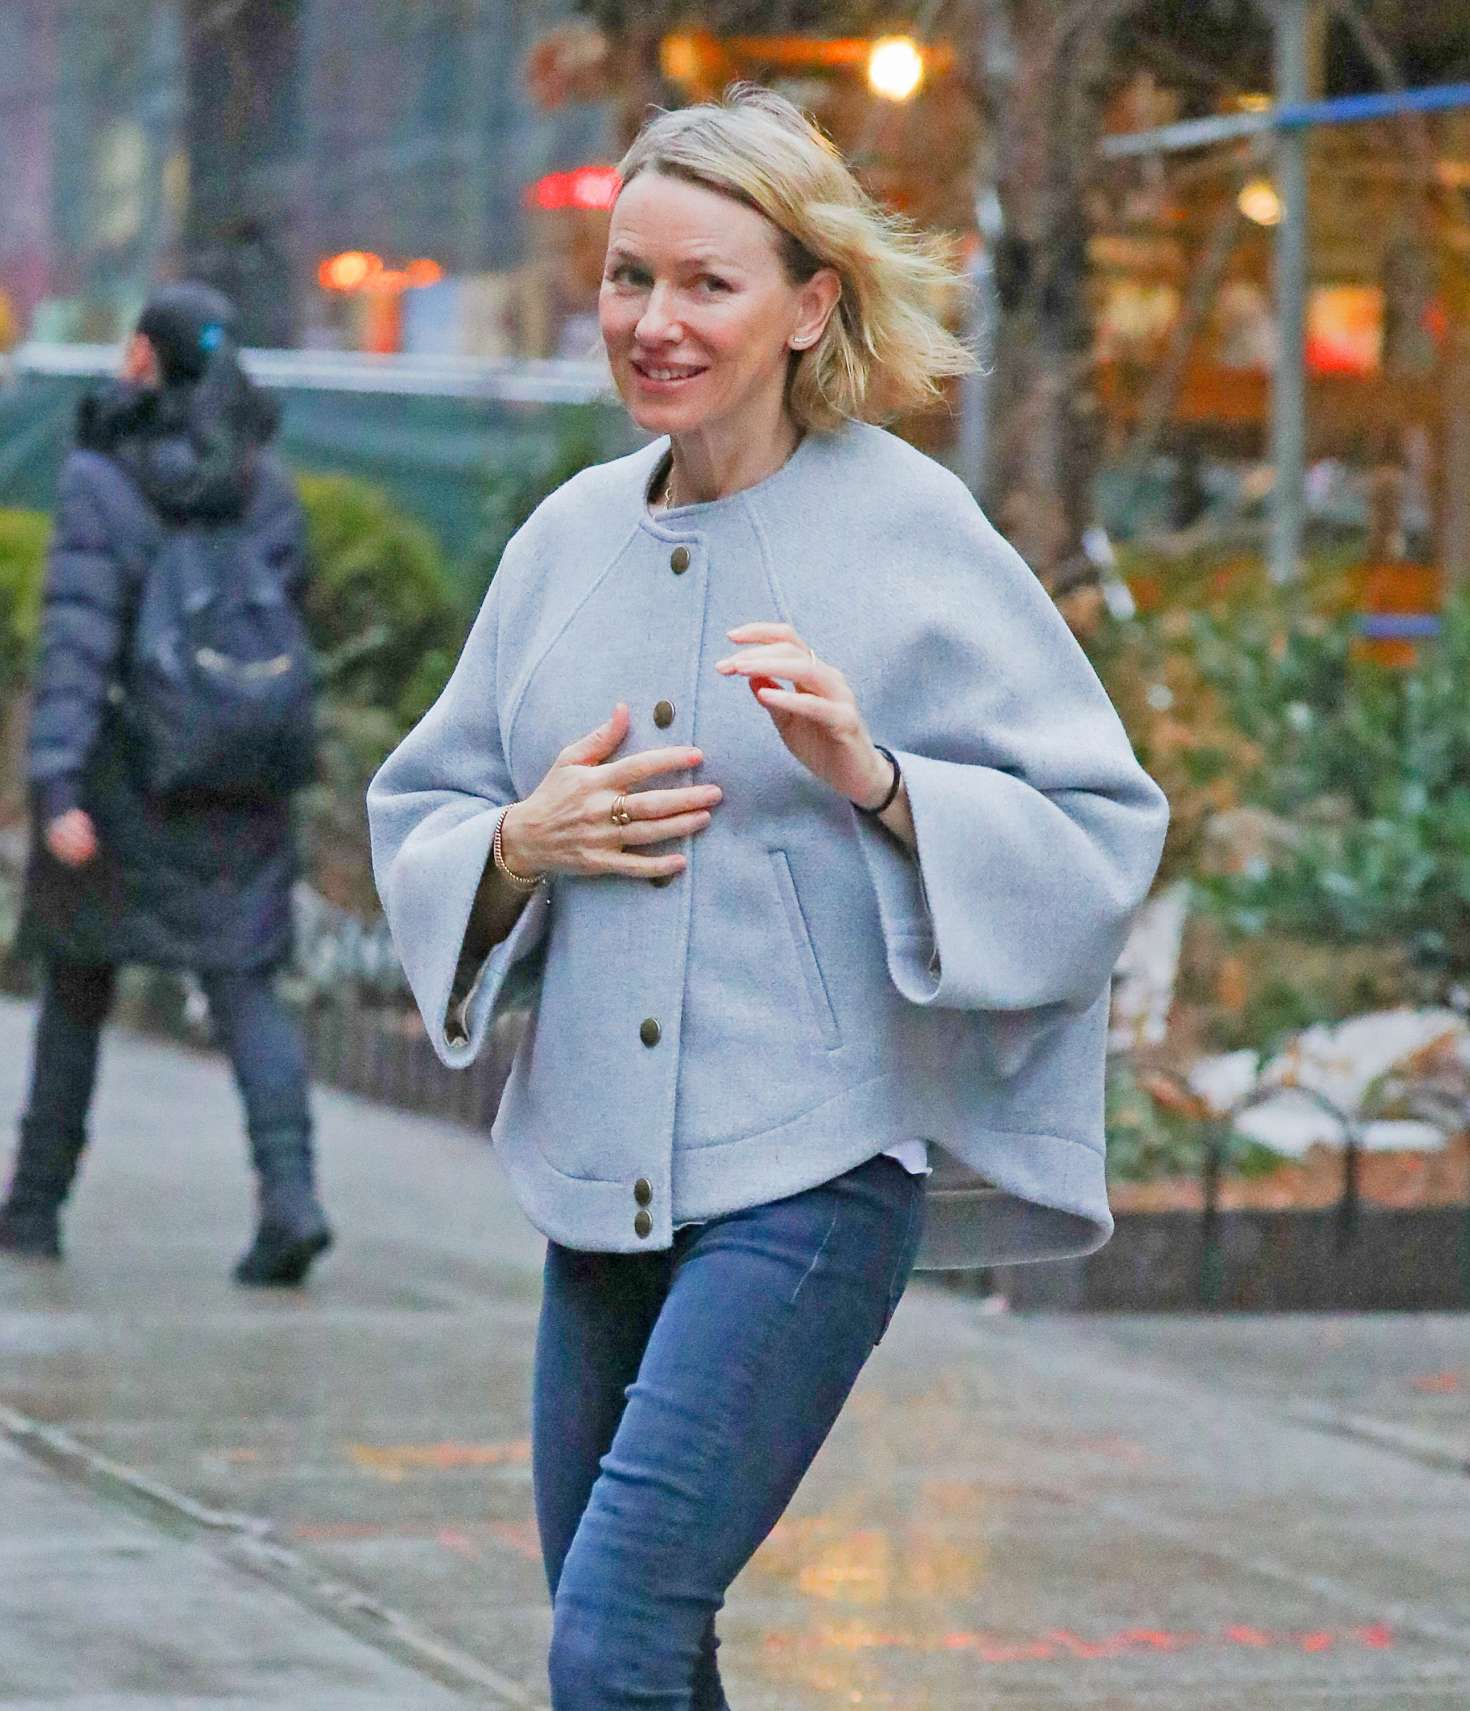 Naomi Watts out and about in New York City